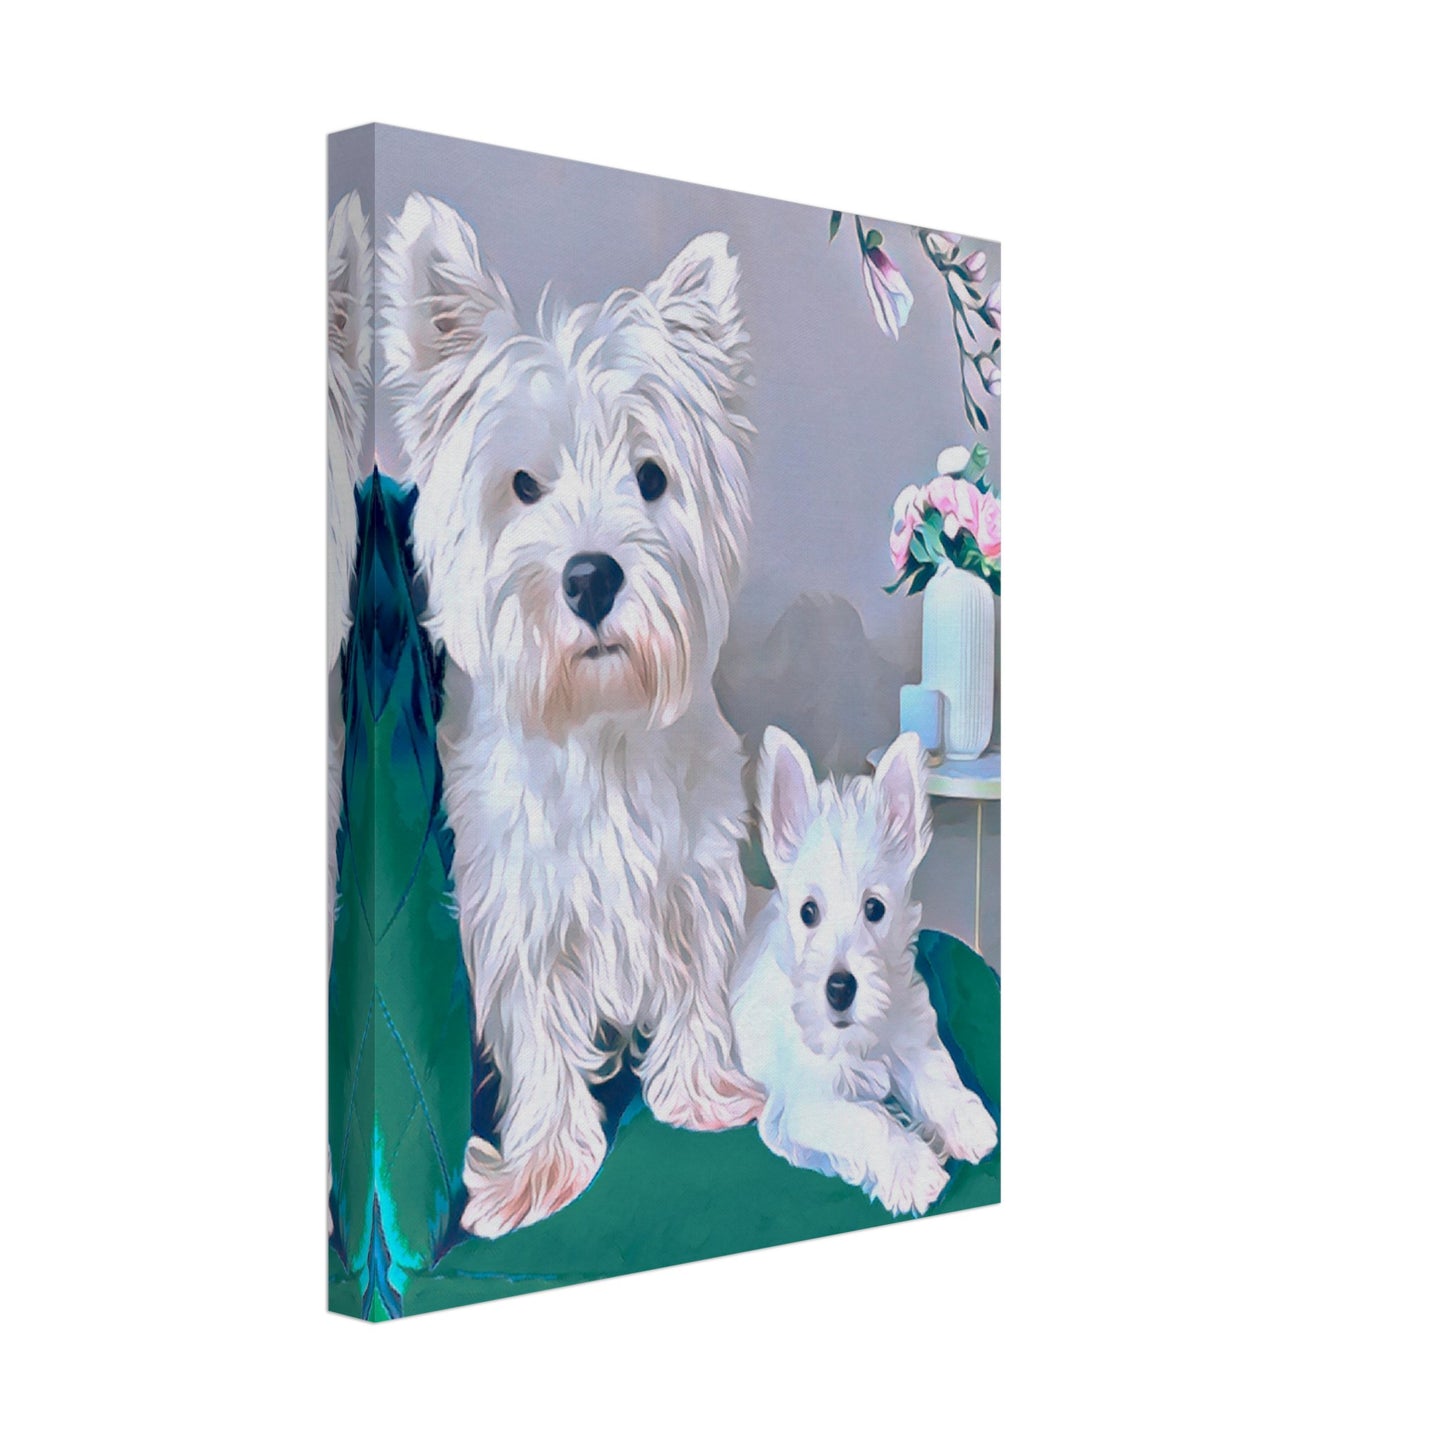 Turn your dog or cat photon into a beautiful  canvas portrait